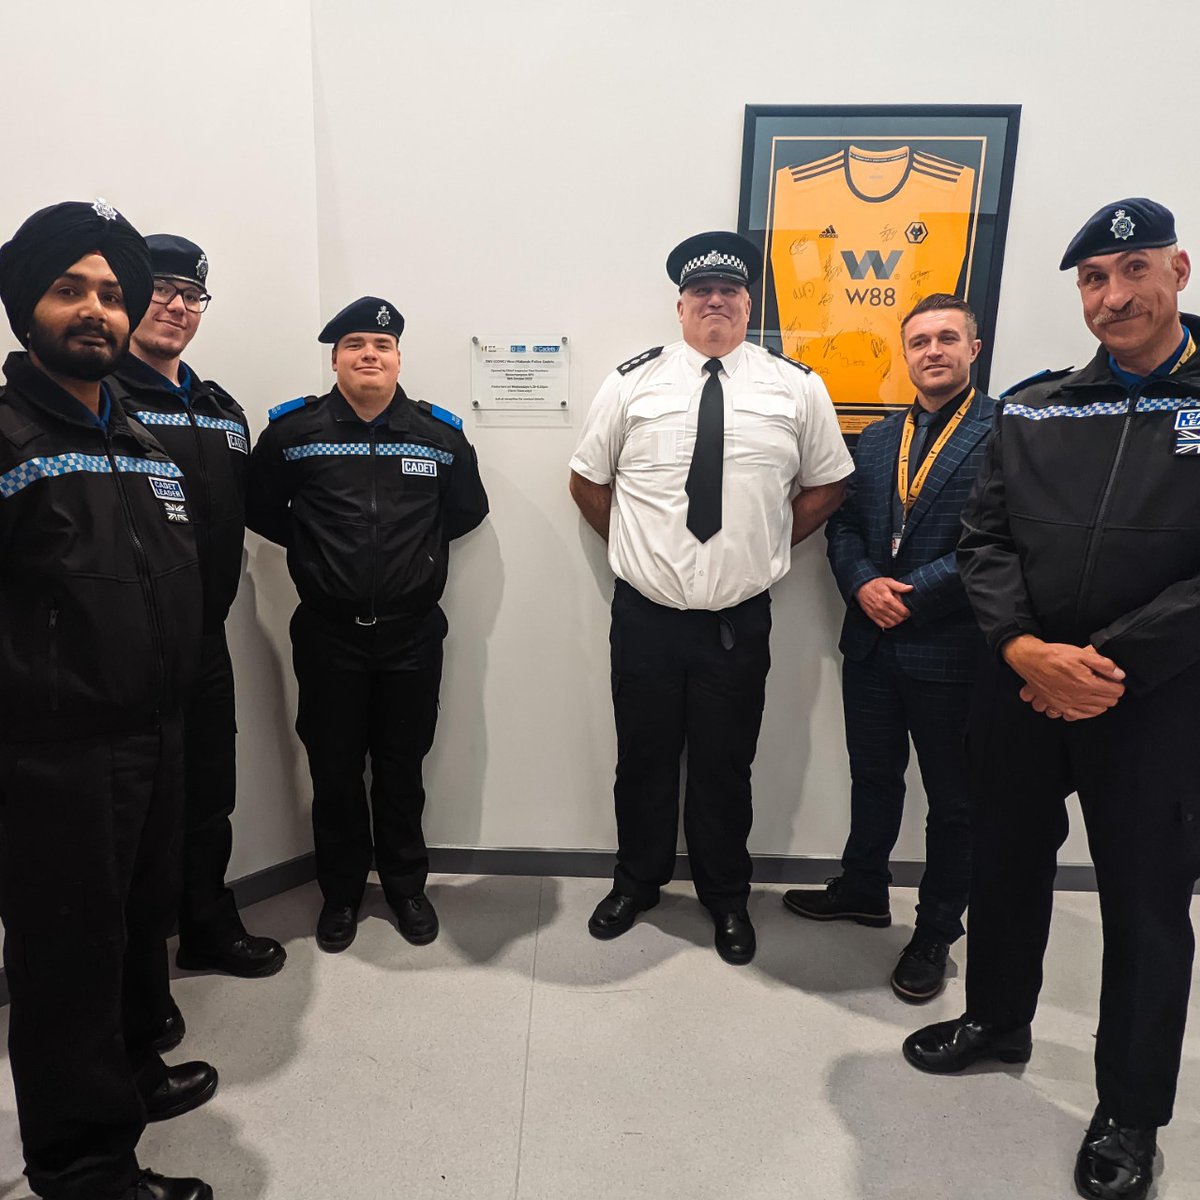 Yesterday we officially opened our 3WV (COWC) West Midlands Police Cadets unit at the college. The unit was opened by Chief Inspector Paul Southern. We're looking forward to seeing what our Cadets will accomplish with the support of West Midlands Police and our partners.